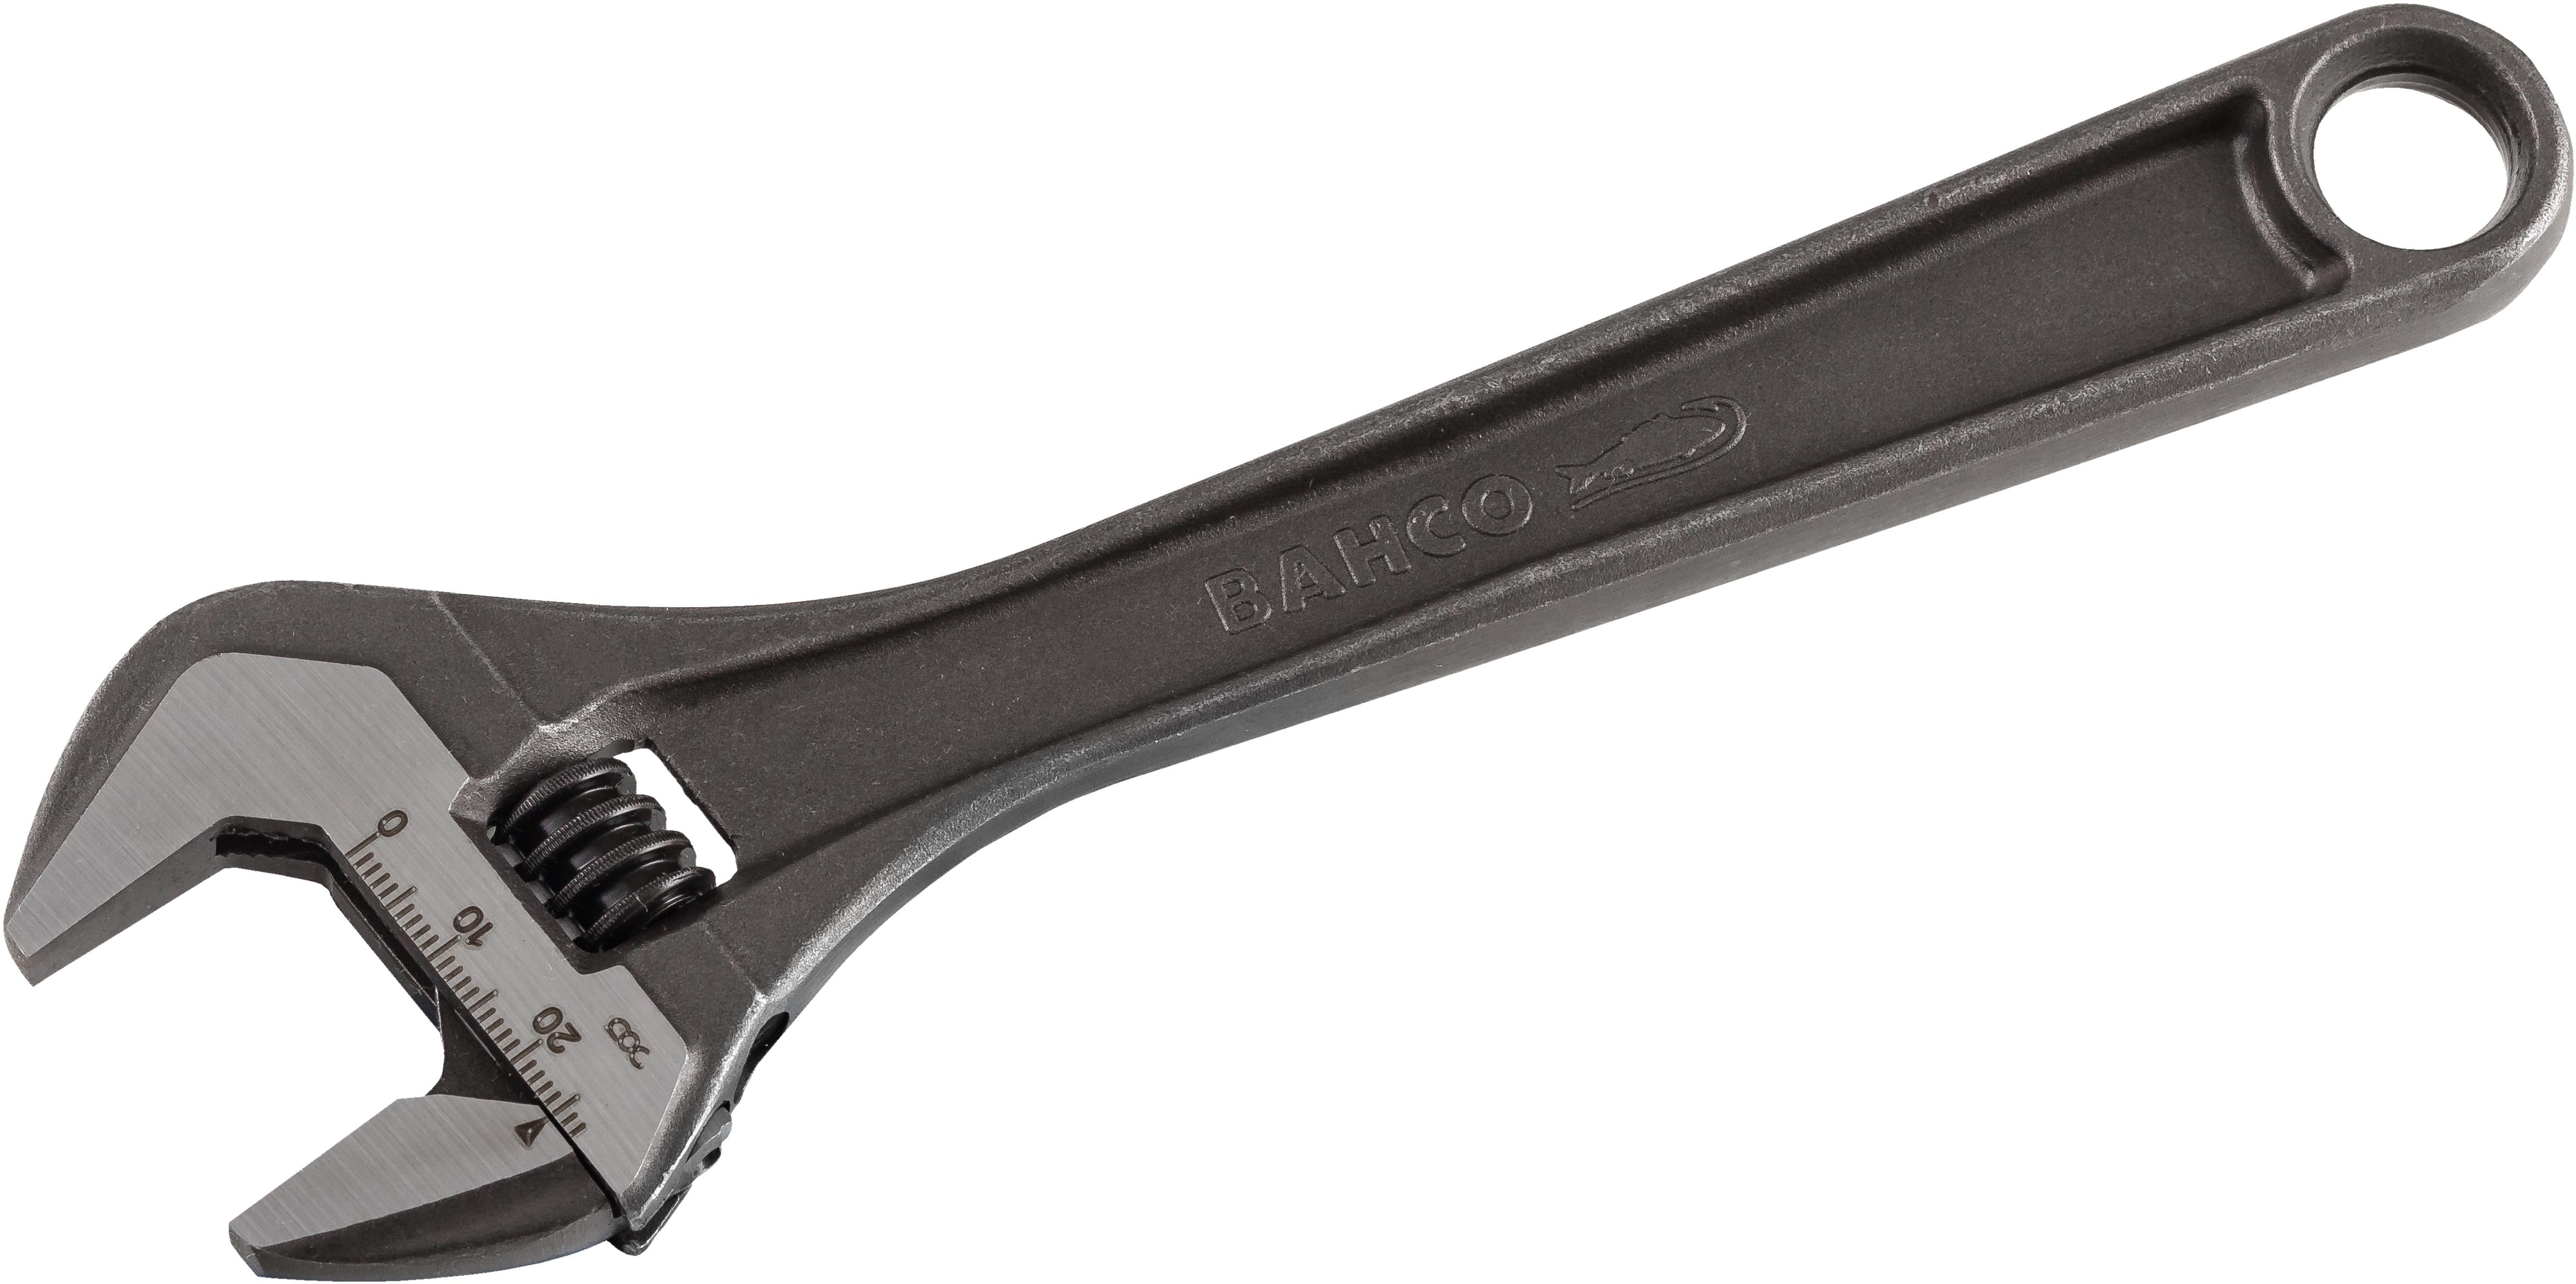 Bahco Adjustable Wrench 8 Inch 8071 27Mm